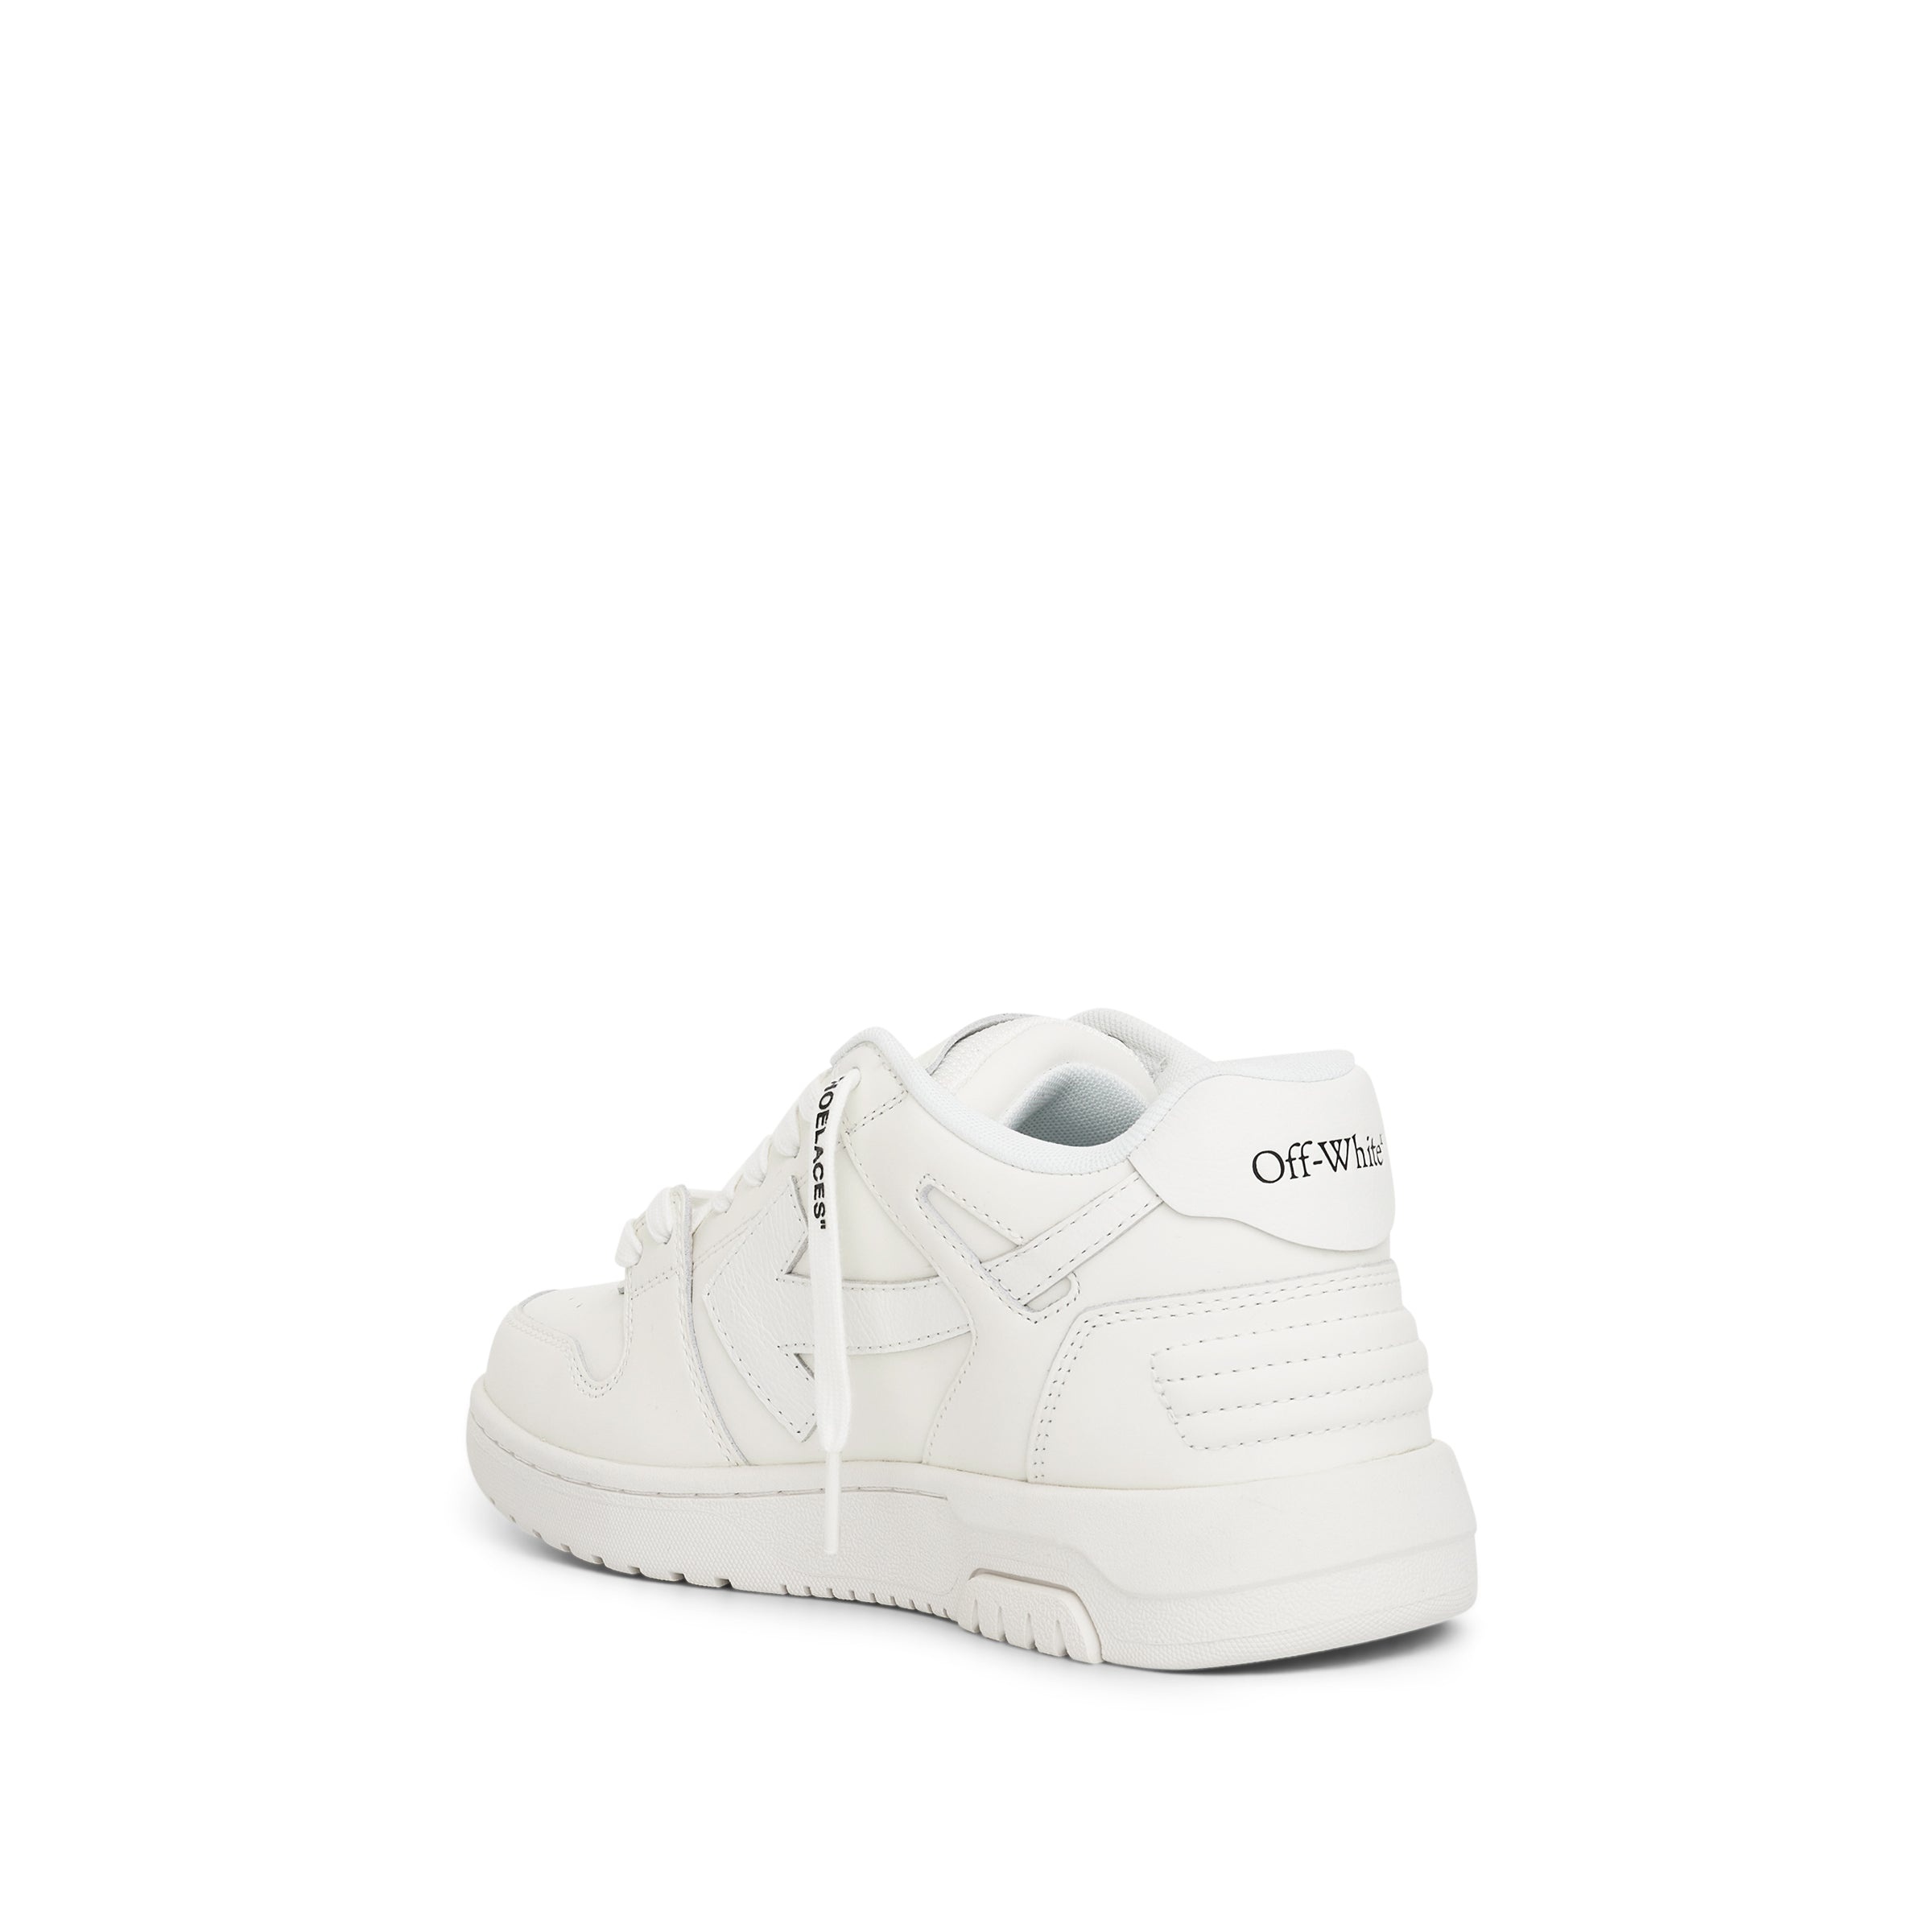 Out of Office "For WALKING" Leather Sneaker in White/Pink - 3